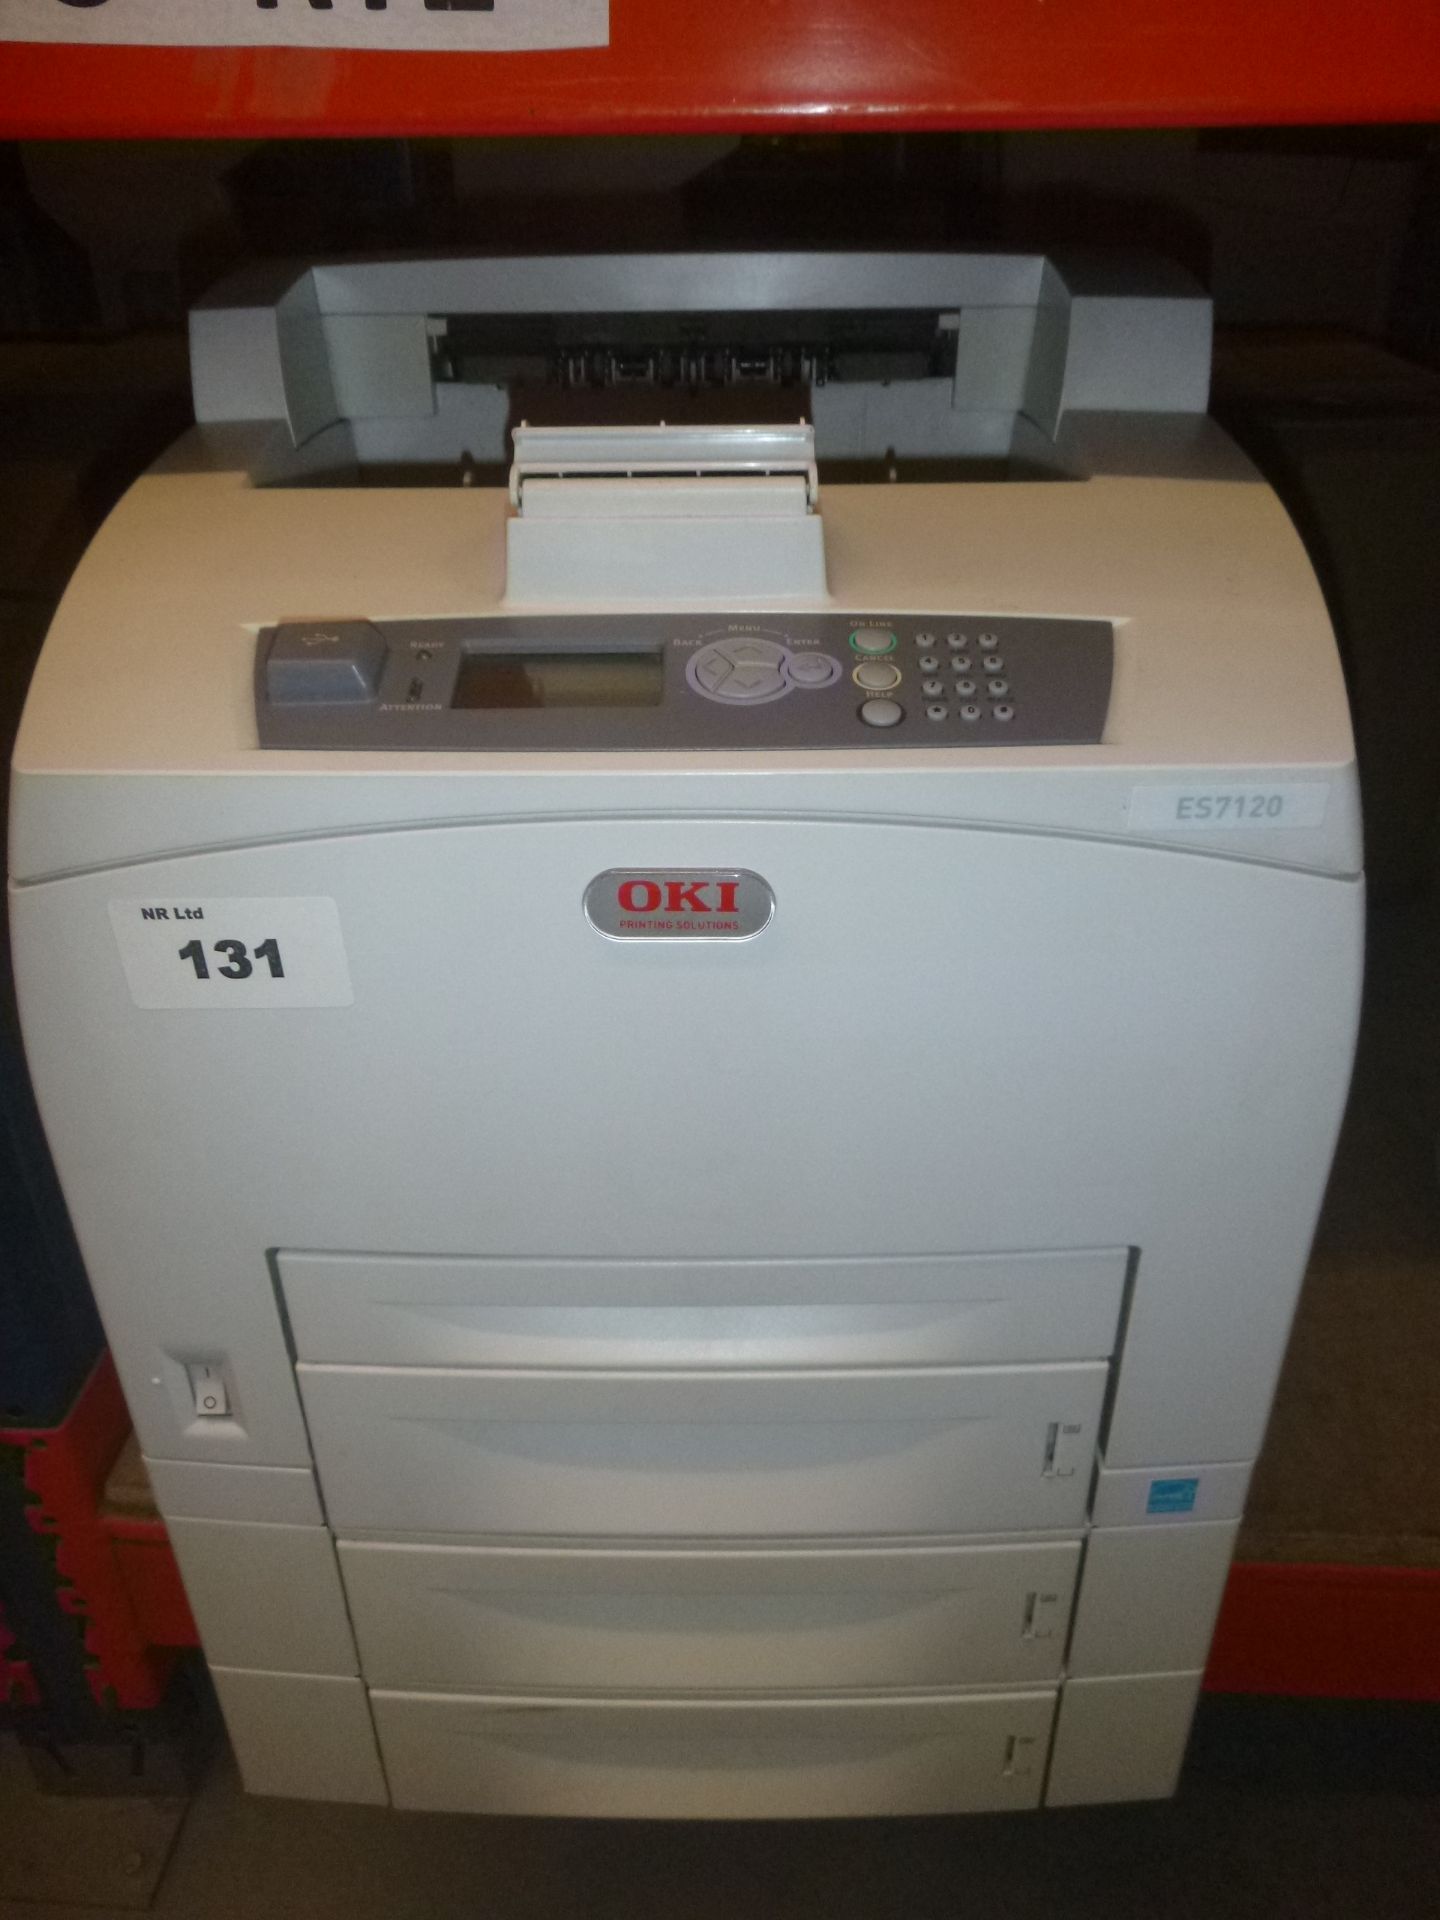 OKI ES7120 NETWORK Laser printer with test print and two extra paper trays